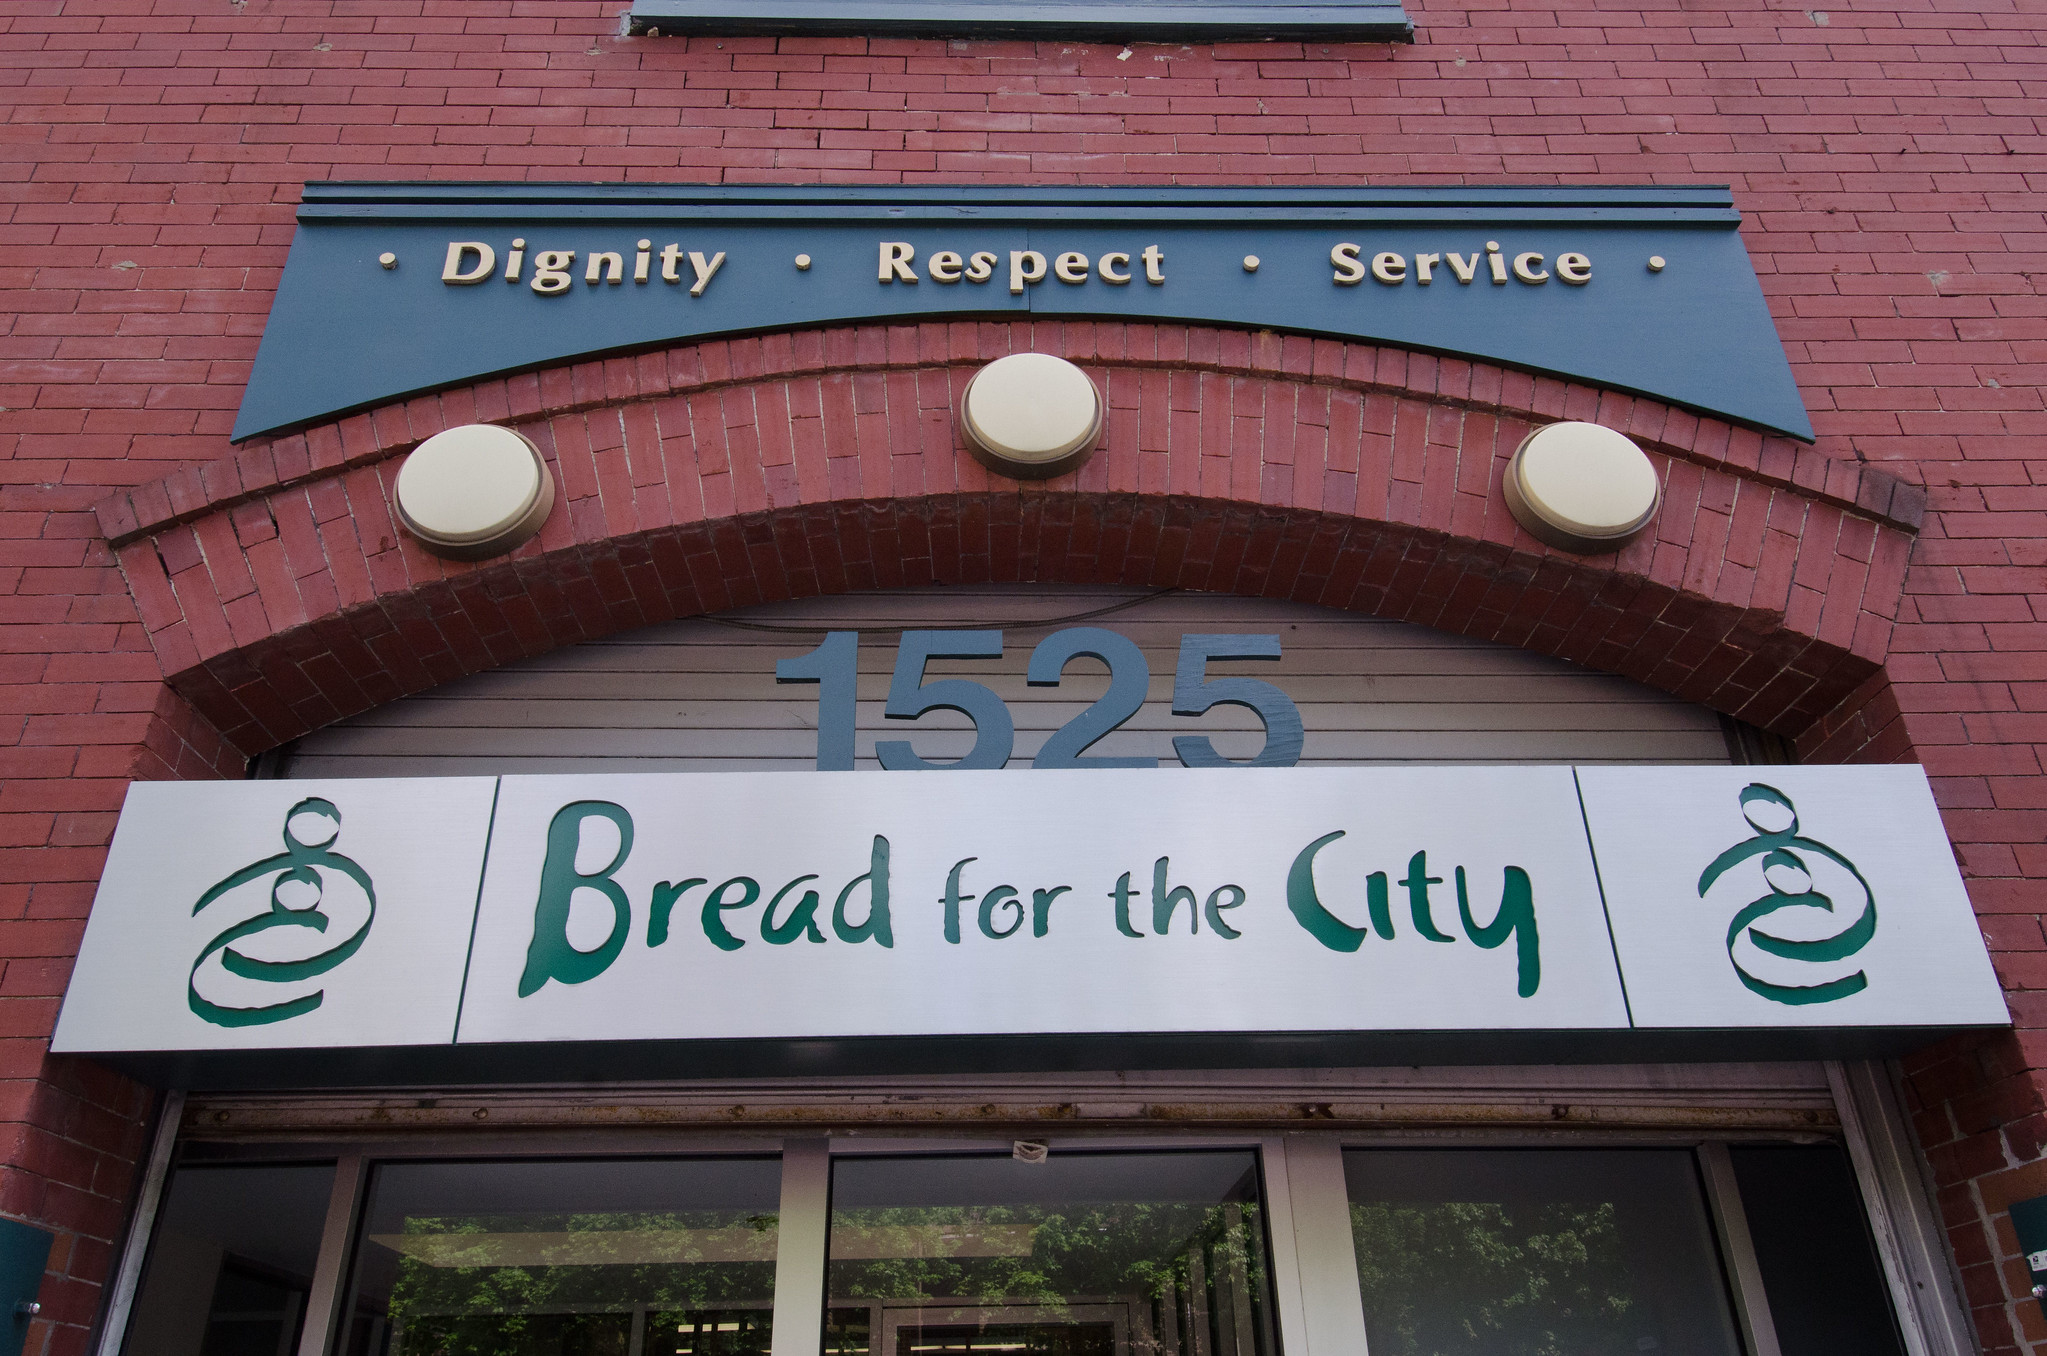 The front facade of a building with a sign that reads "Bread for the City"